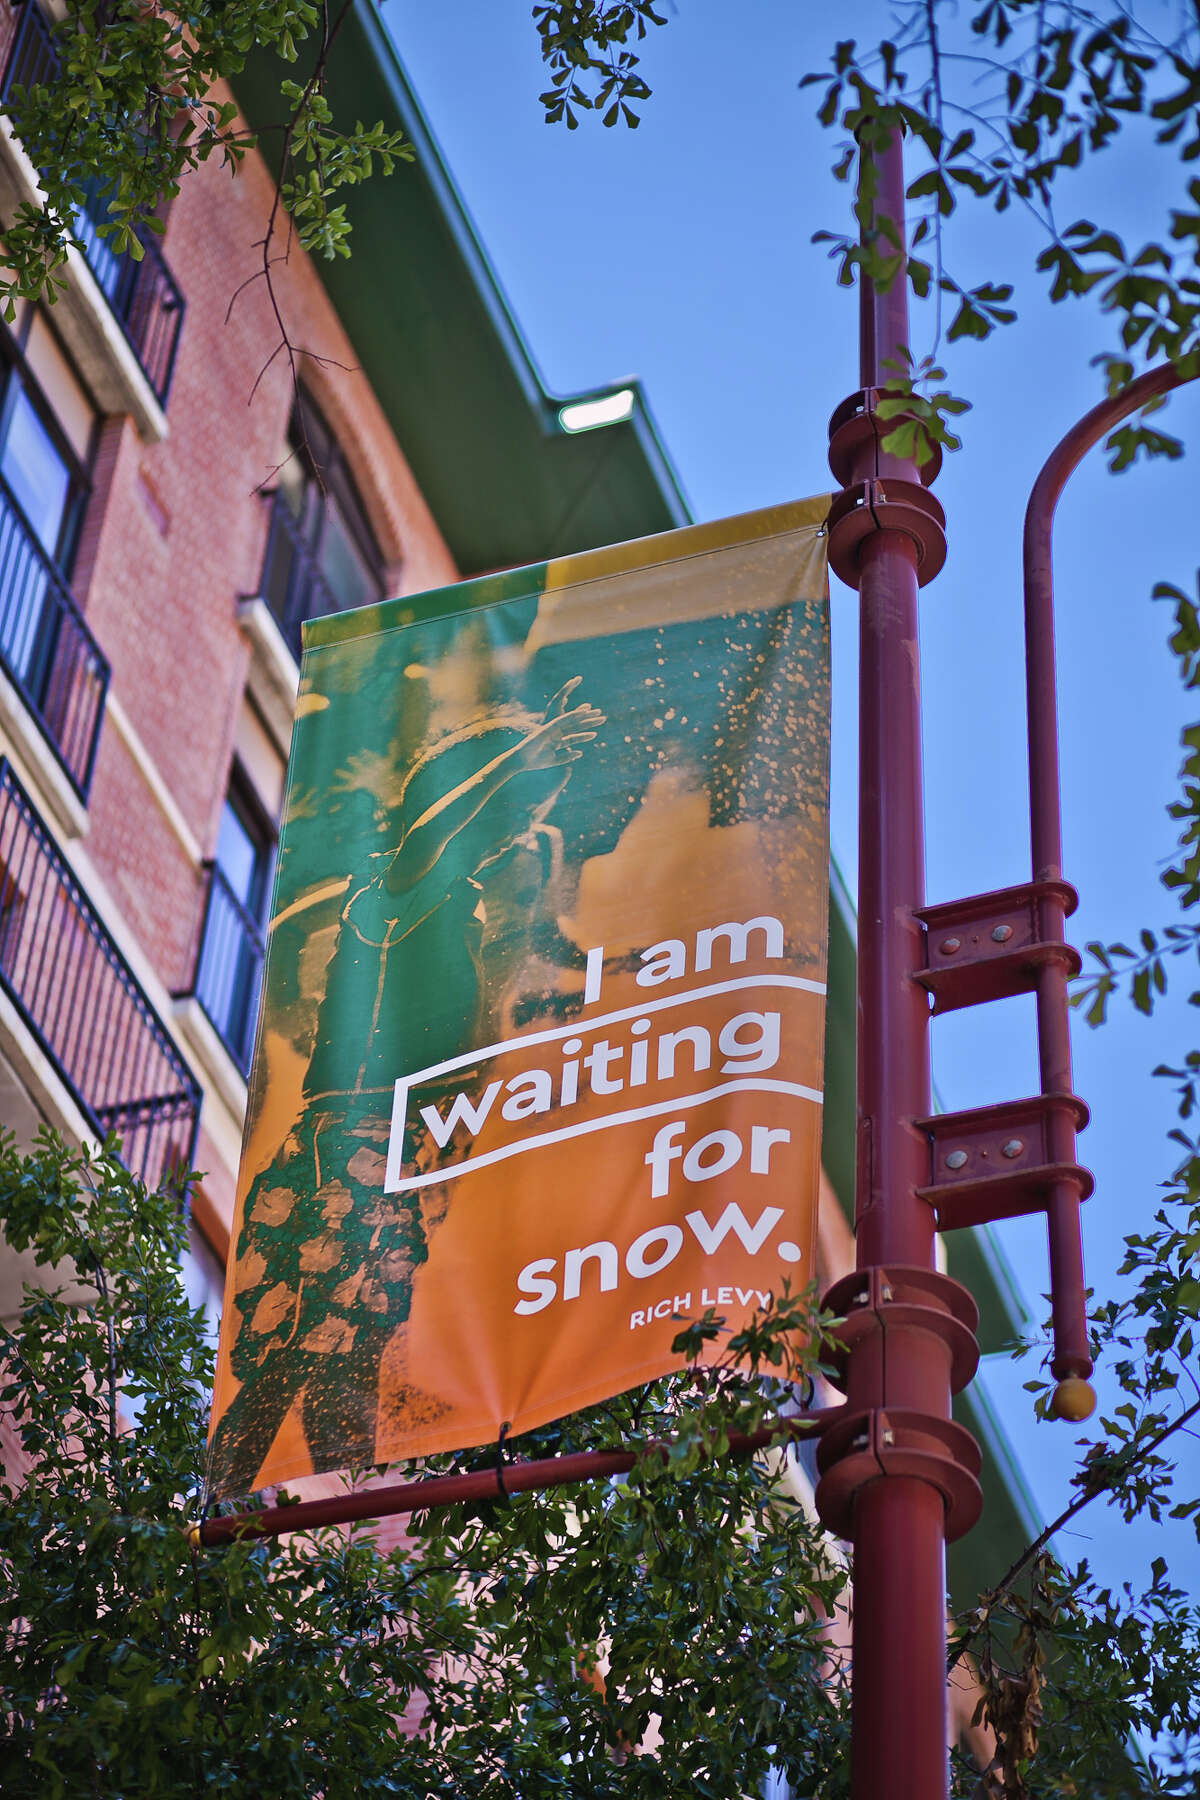 This one quotes Rich Levy, a poet and the head of Inprint Houston: "I am waiting for snow."